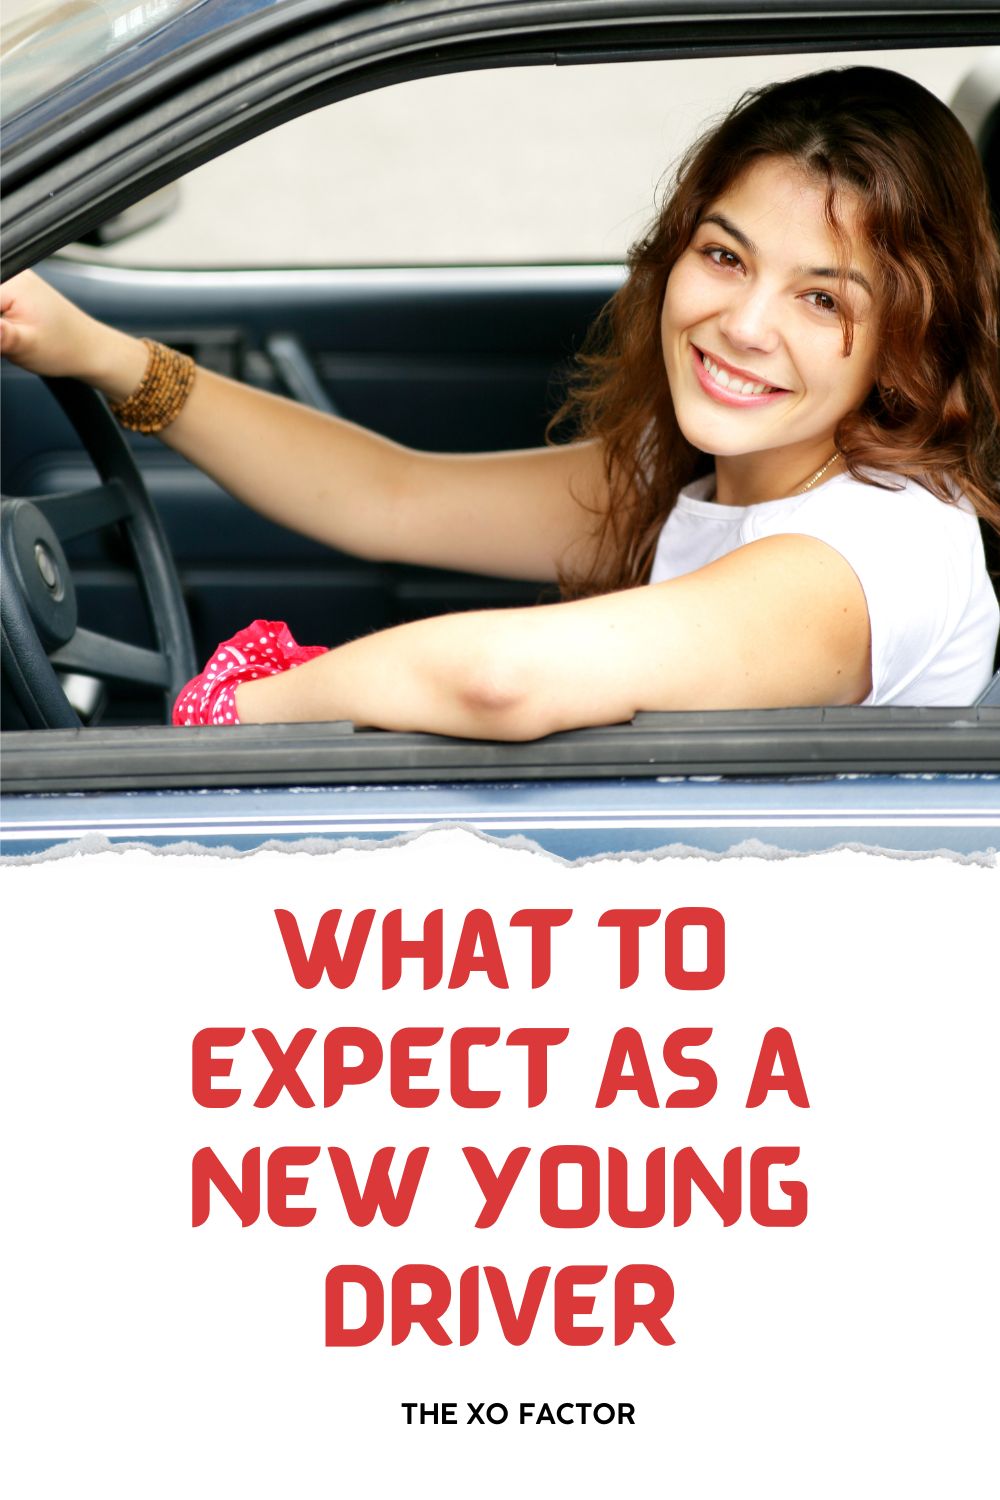 Passed Your Driving Test? What To Expect As A New Young Driver